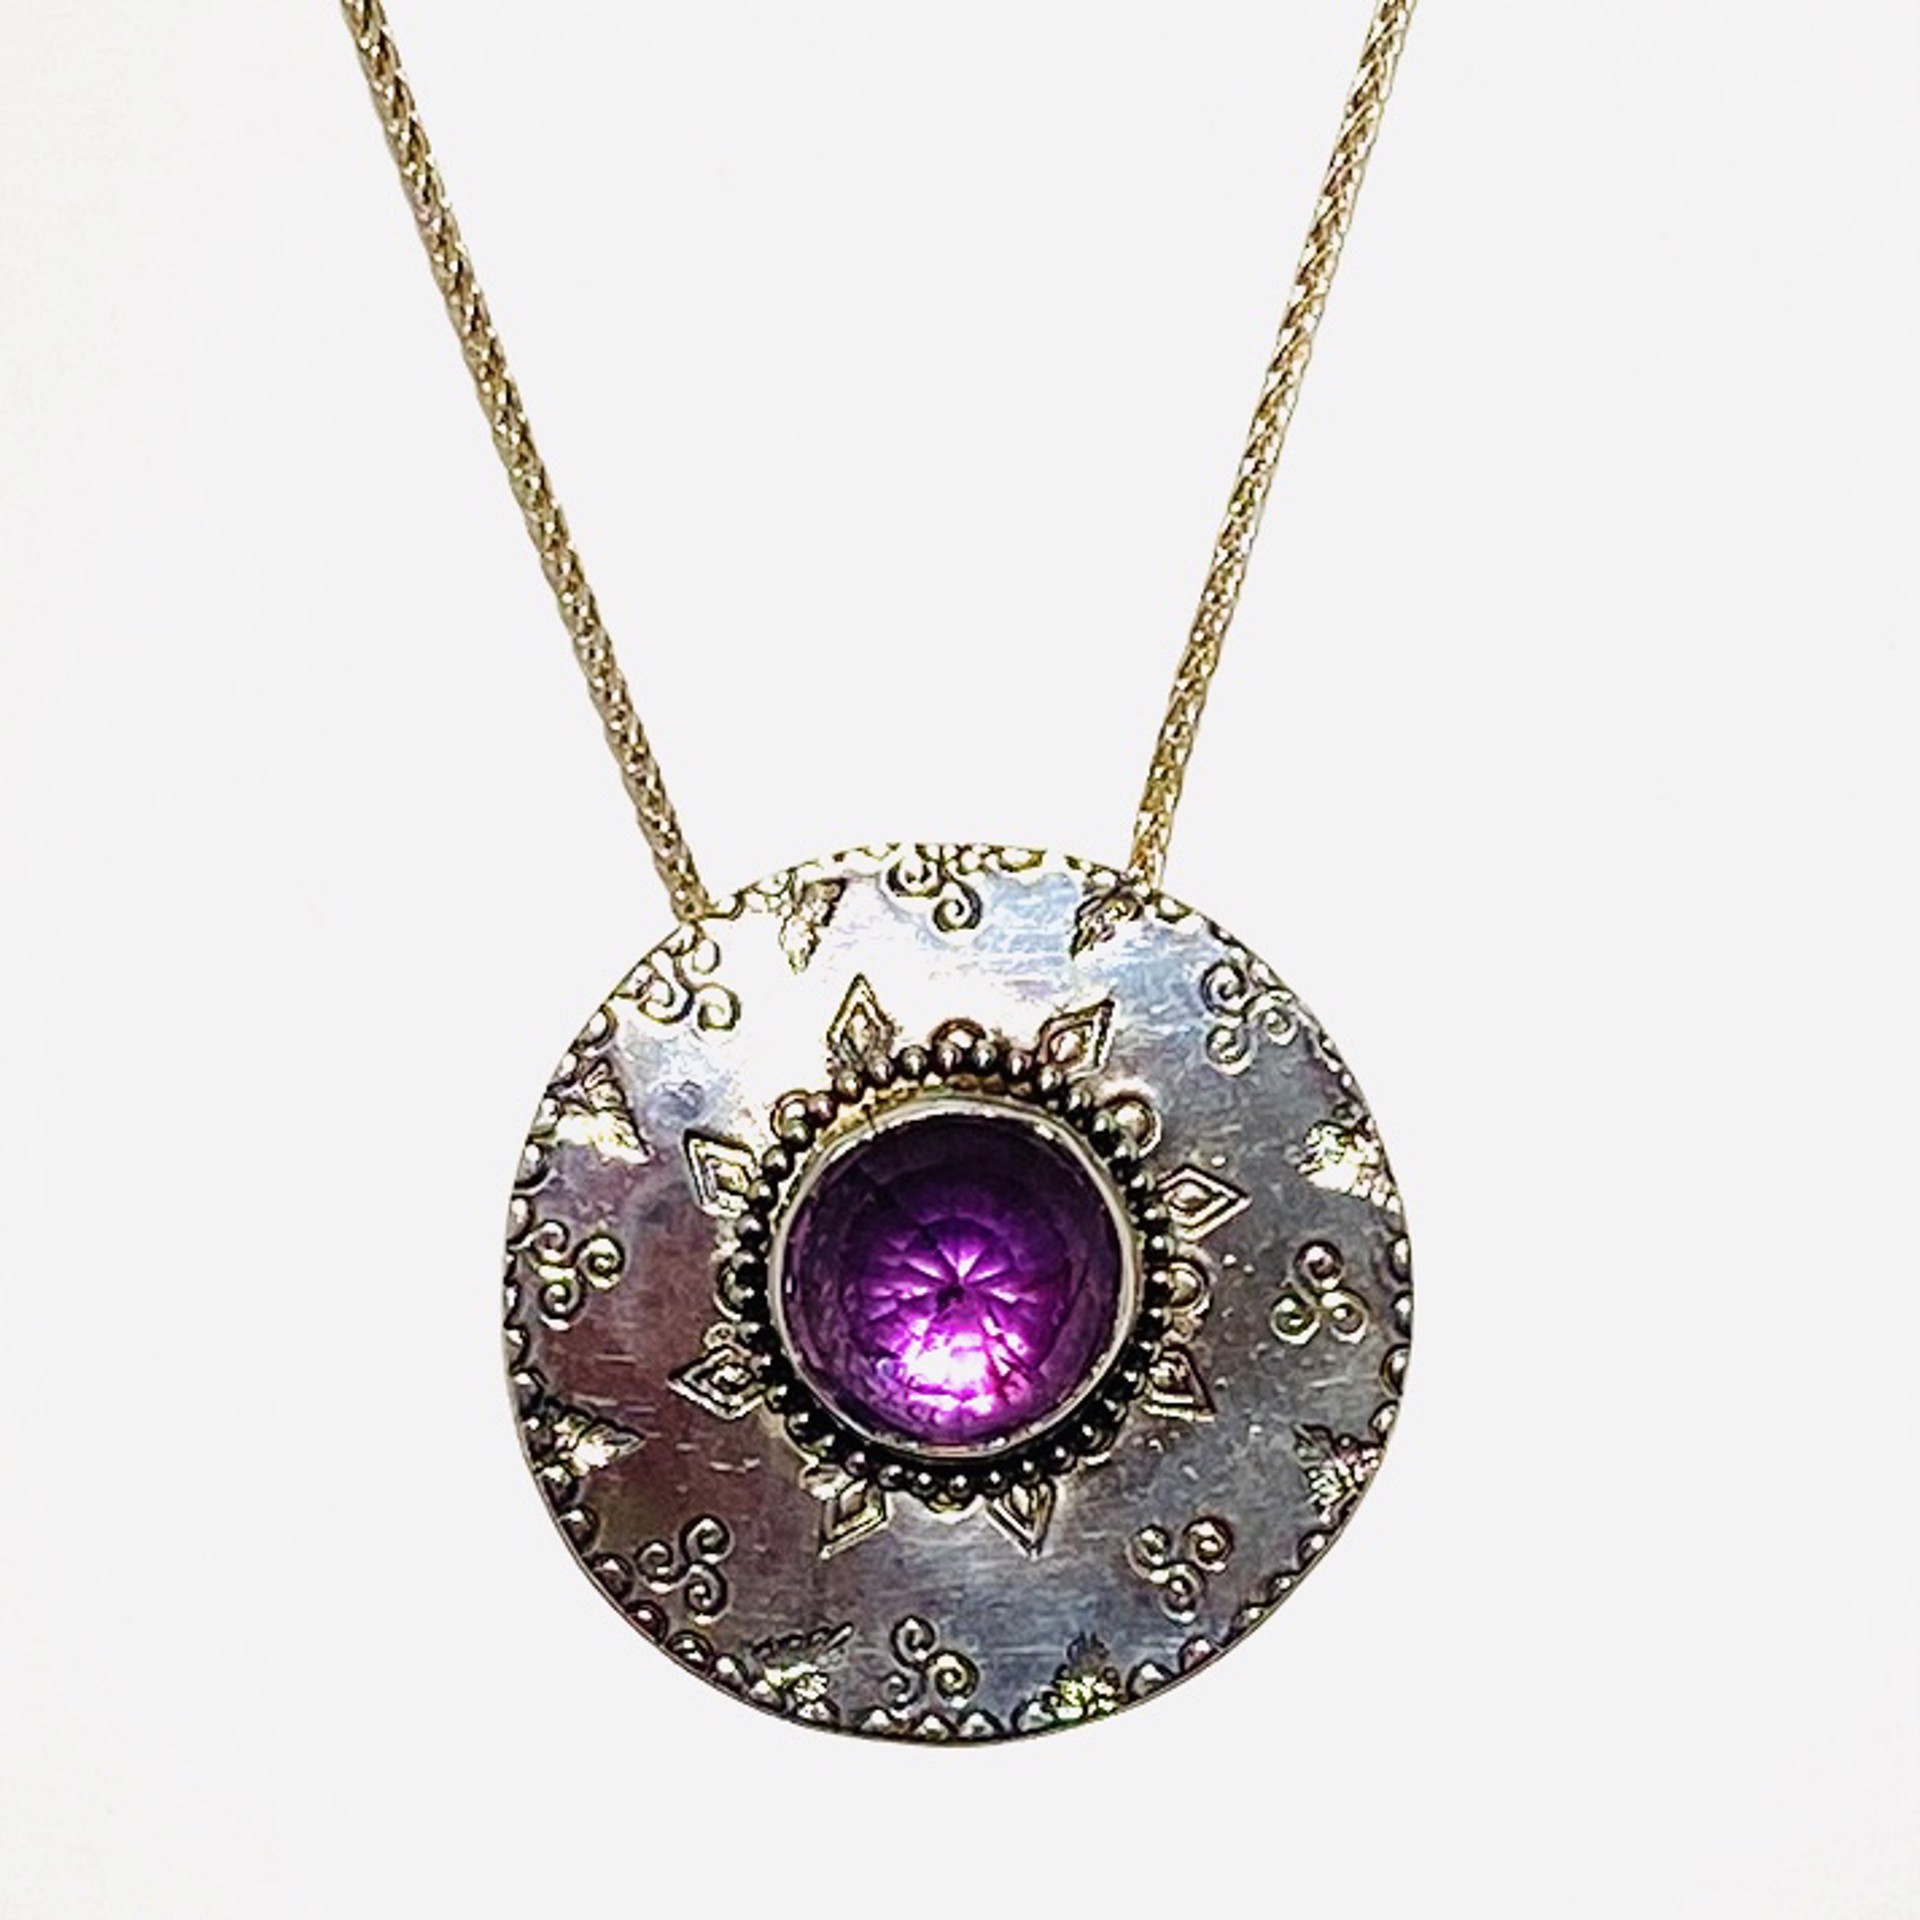 AB23-40 Hand-stamped Circle Medallion Faceted Amethyst Focal Slim Leather cord by Anne Bivens